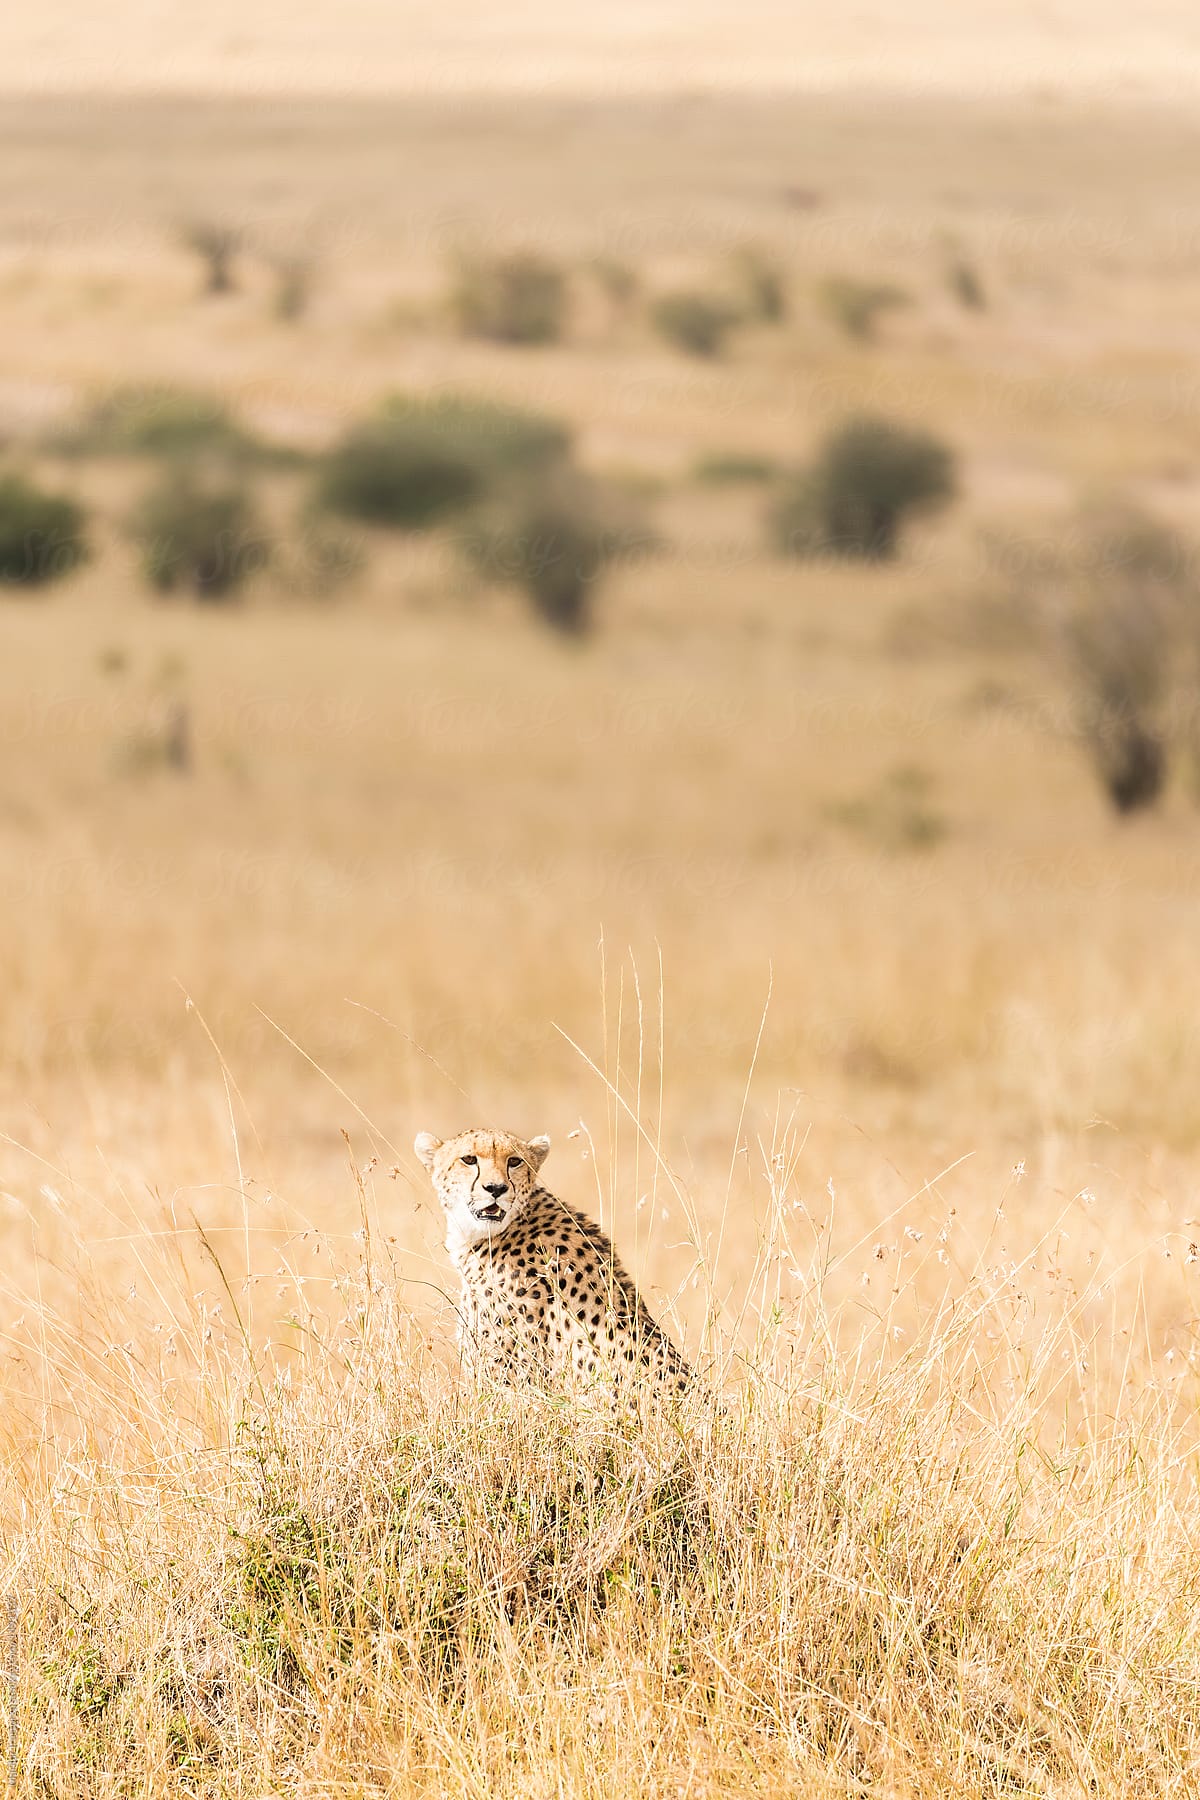 Cheetah in search of a prey